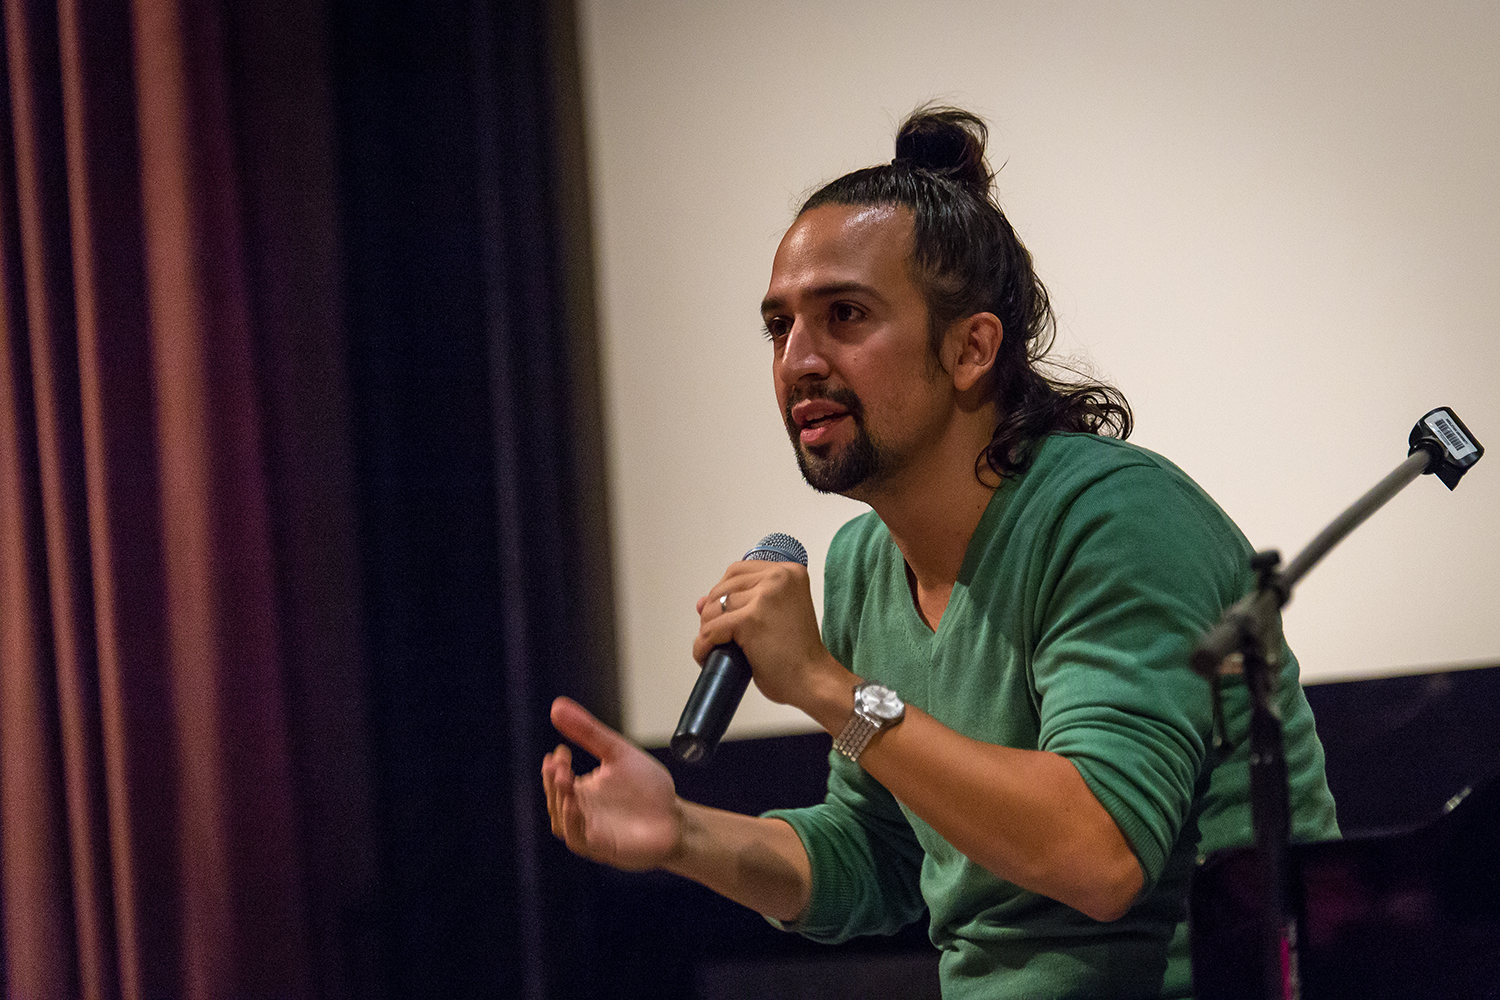 On Sept. 23, Tony Award-winning composer/lyricist and actor Lin-Manuel Miranda ’02 spoke about the creation of the musical In The Heights during his time at Wesleyan. His talk, "When You're Home: A Look Back at the Origins of In the Heights," was sponsored by the Theater Department and Center for the Arts. 